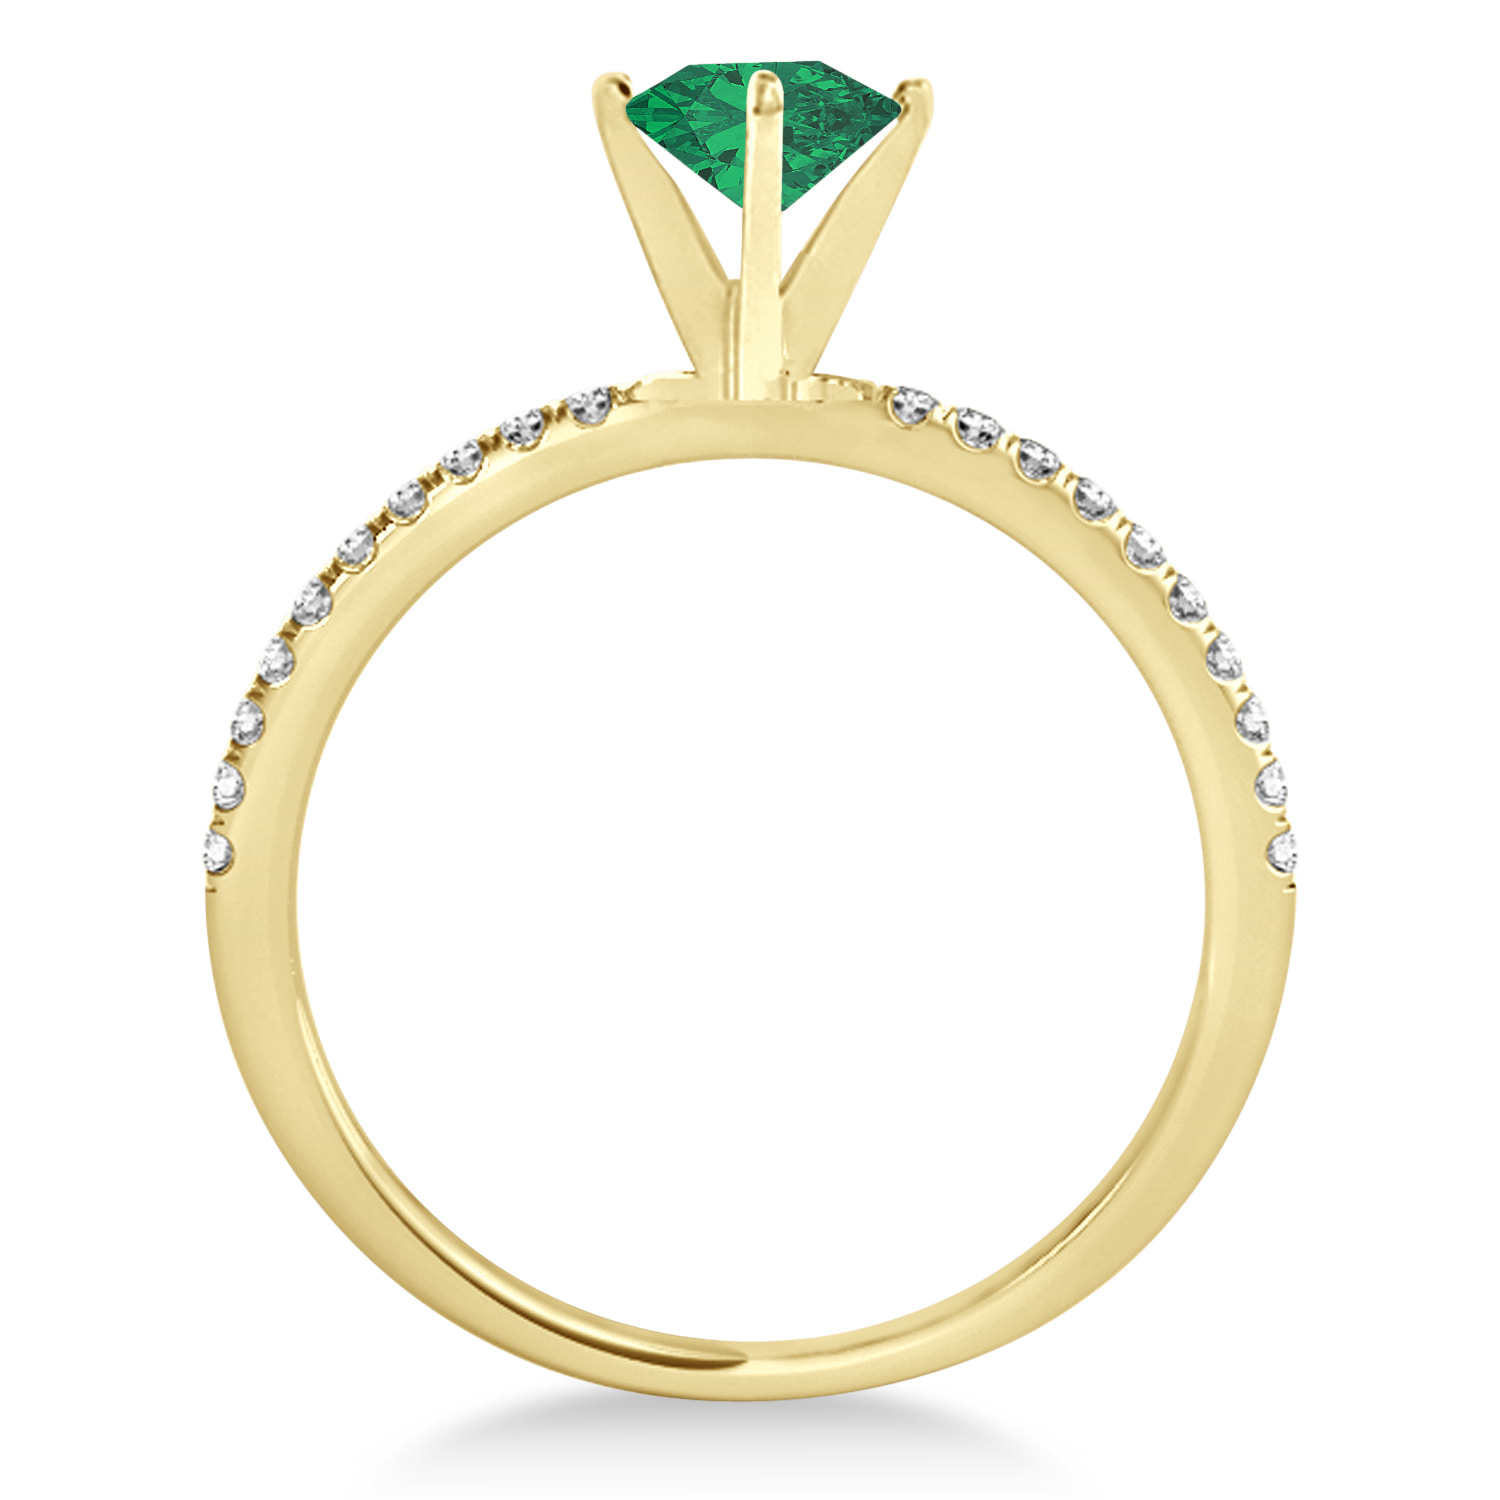 Emerald & Diamond Accented Oval Shape Engagement Ring 18k Yellow Gold (0.75ct)